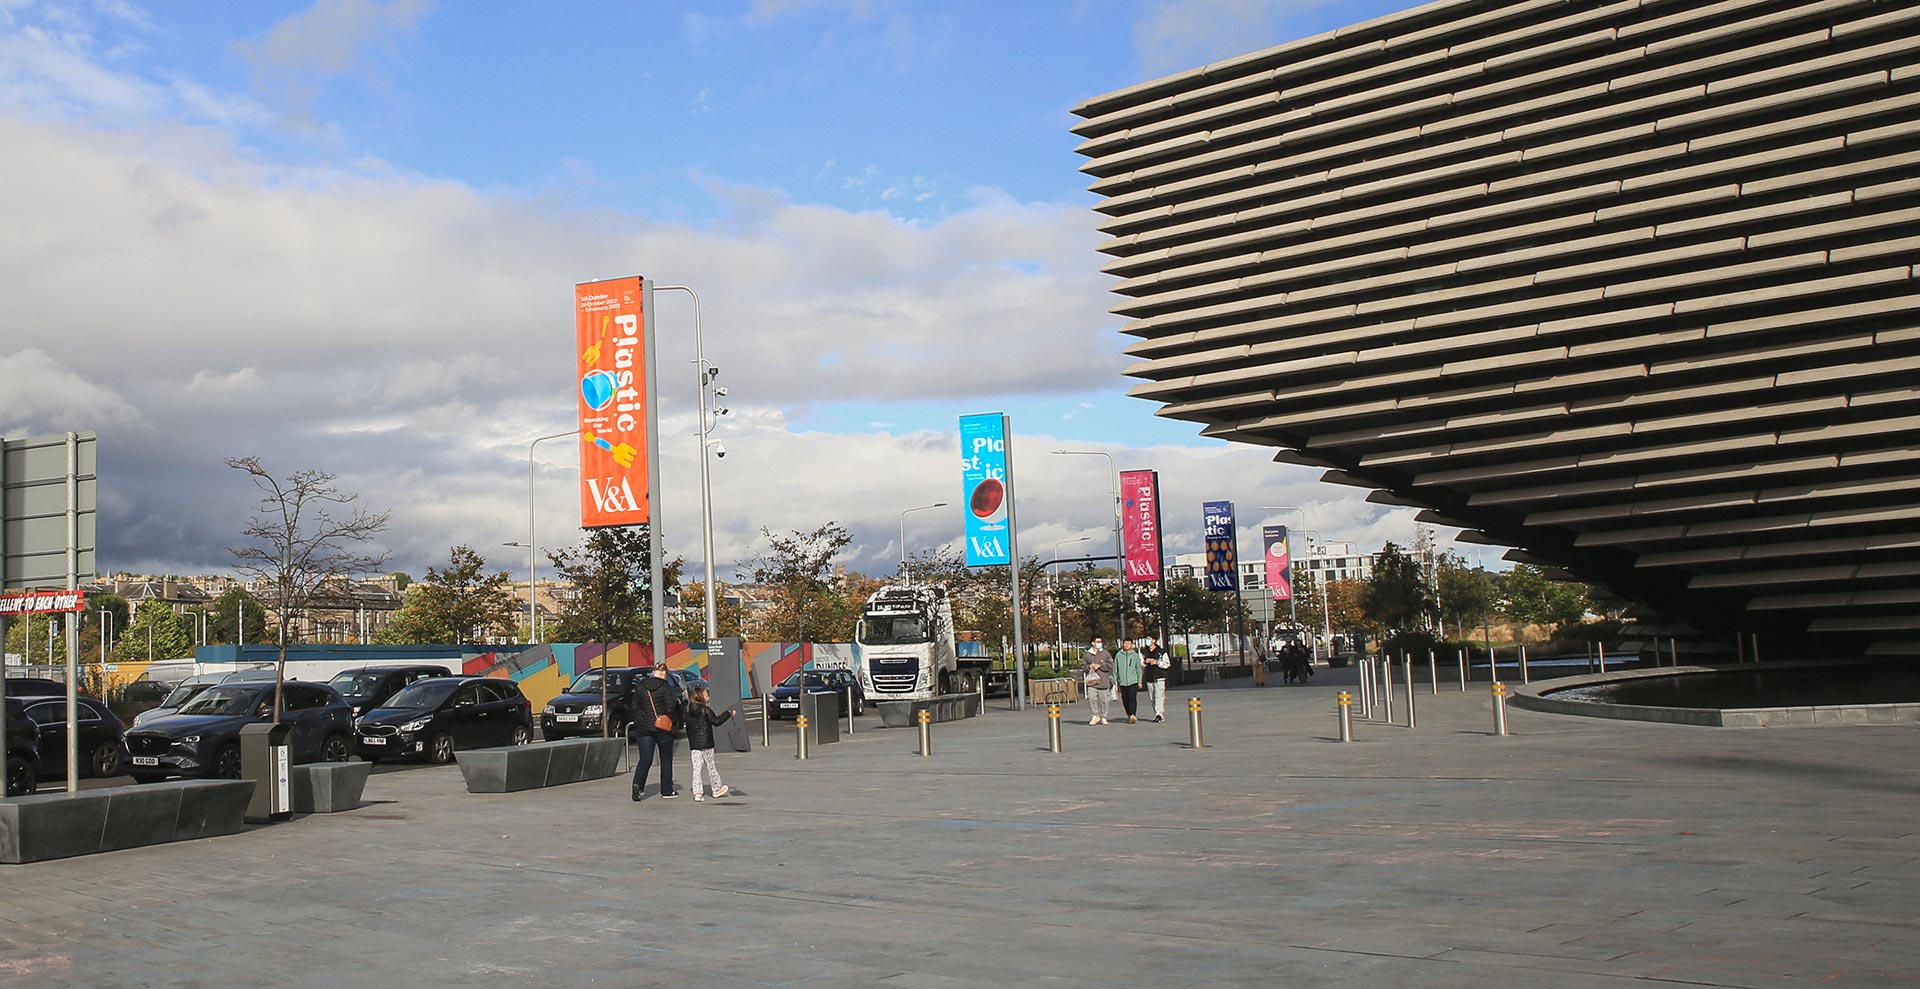 Photo from outside V&A Dundee showing the four different banner designs promoting the Plastic: Remaking our world exhibition.